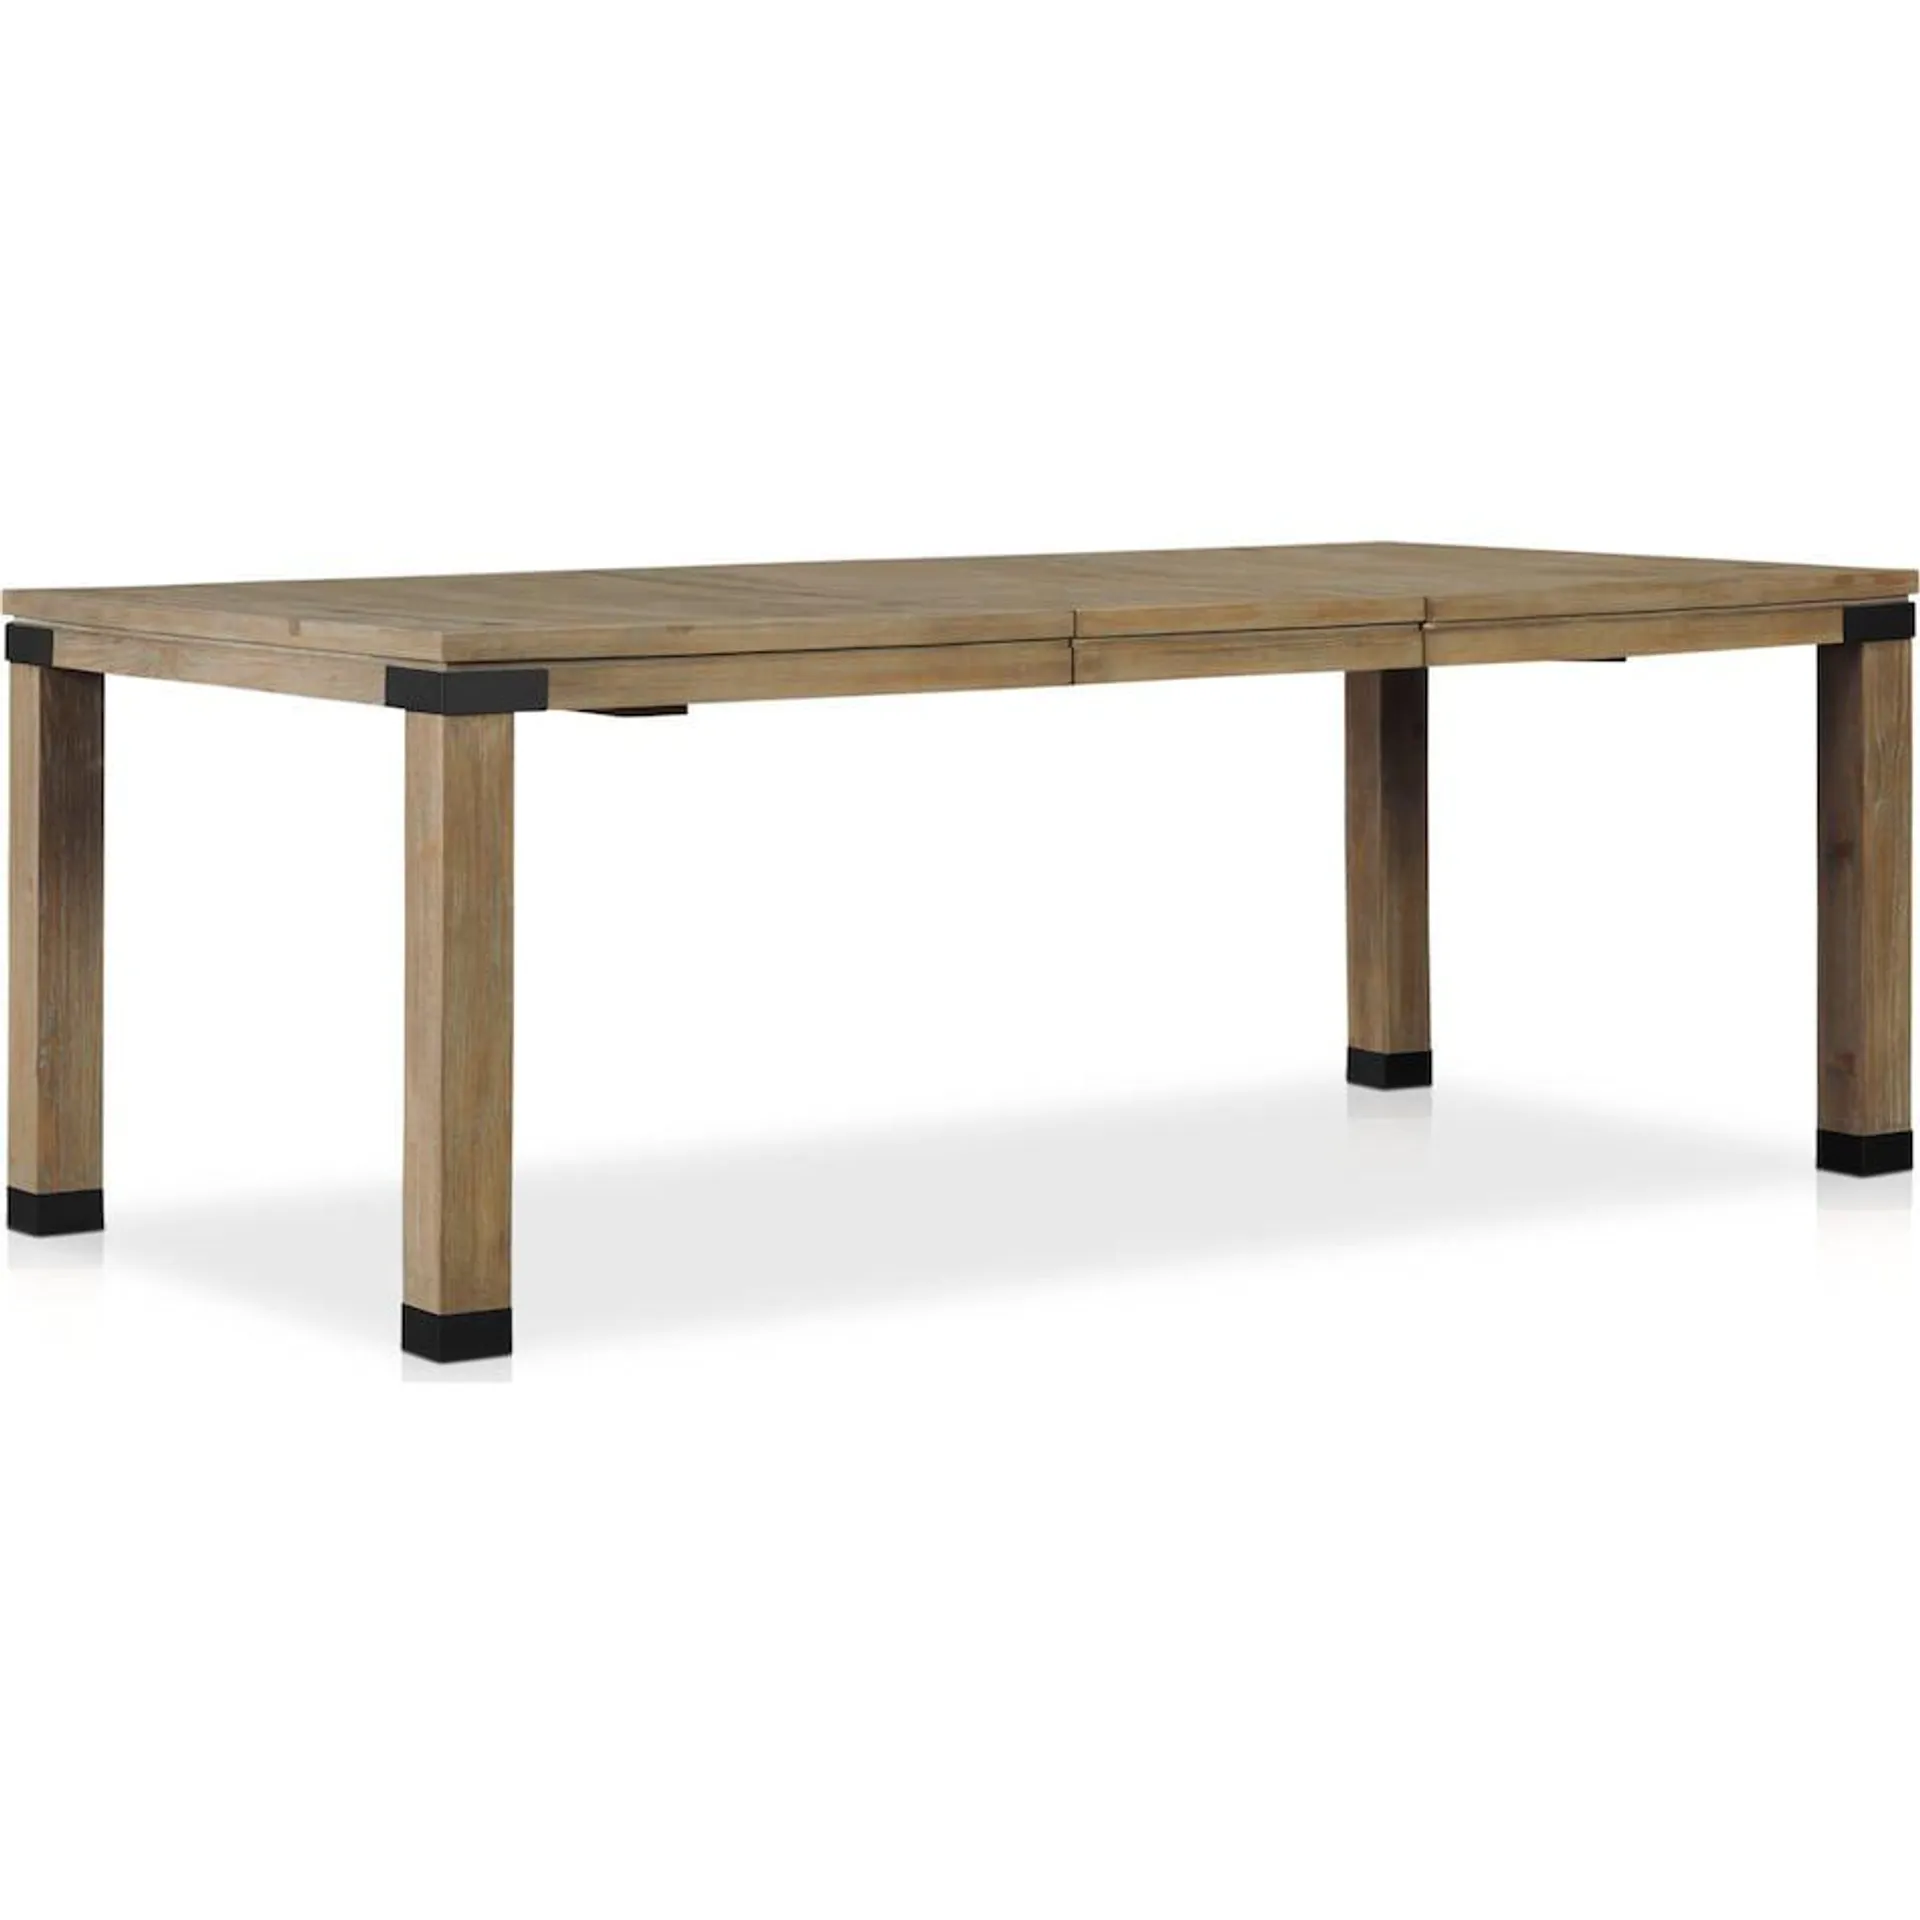 Brooke Harbor Dining Table